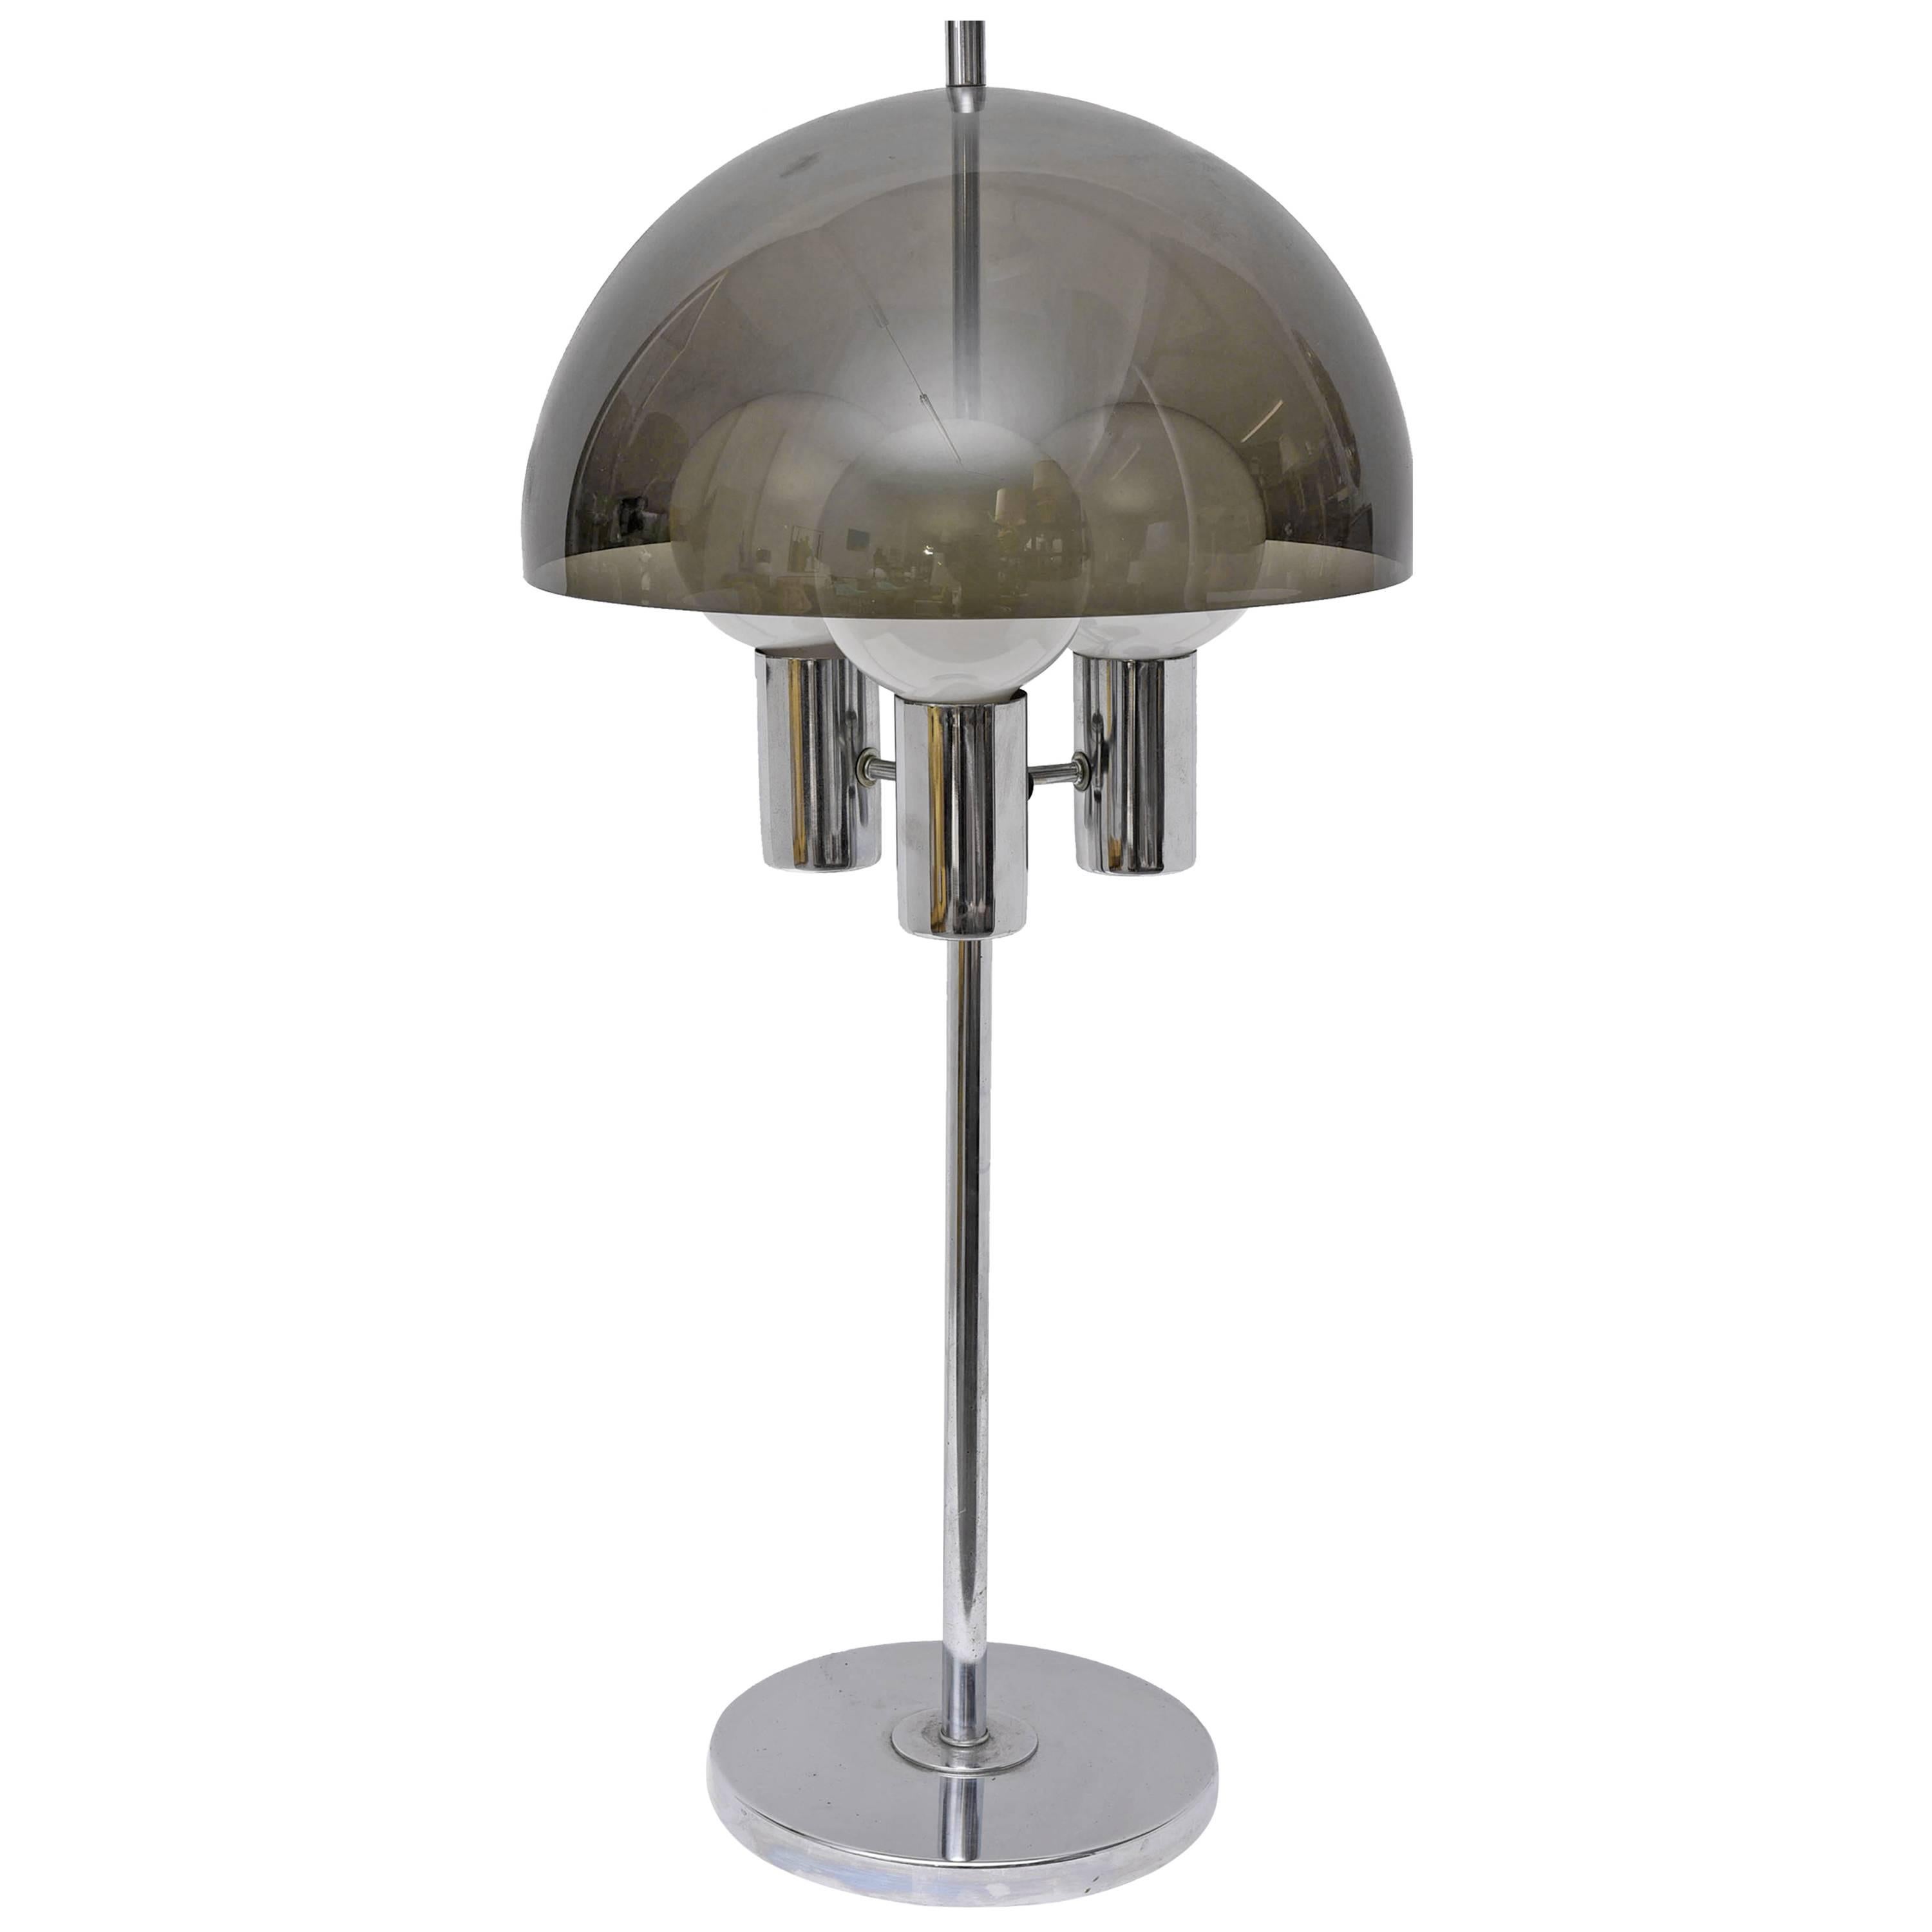 Chrome and Smoked Lucite Tall Table Lamp, 1960s, USA